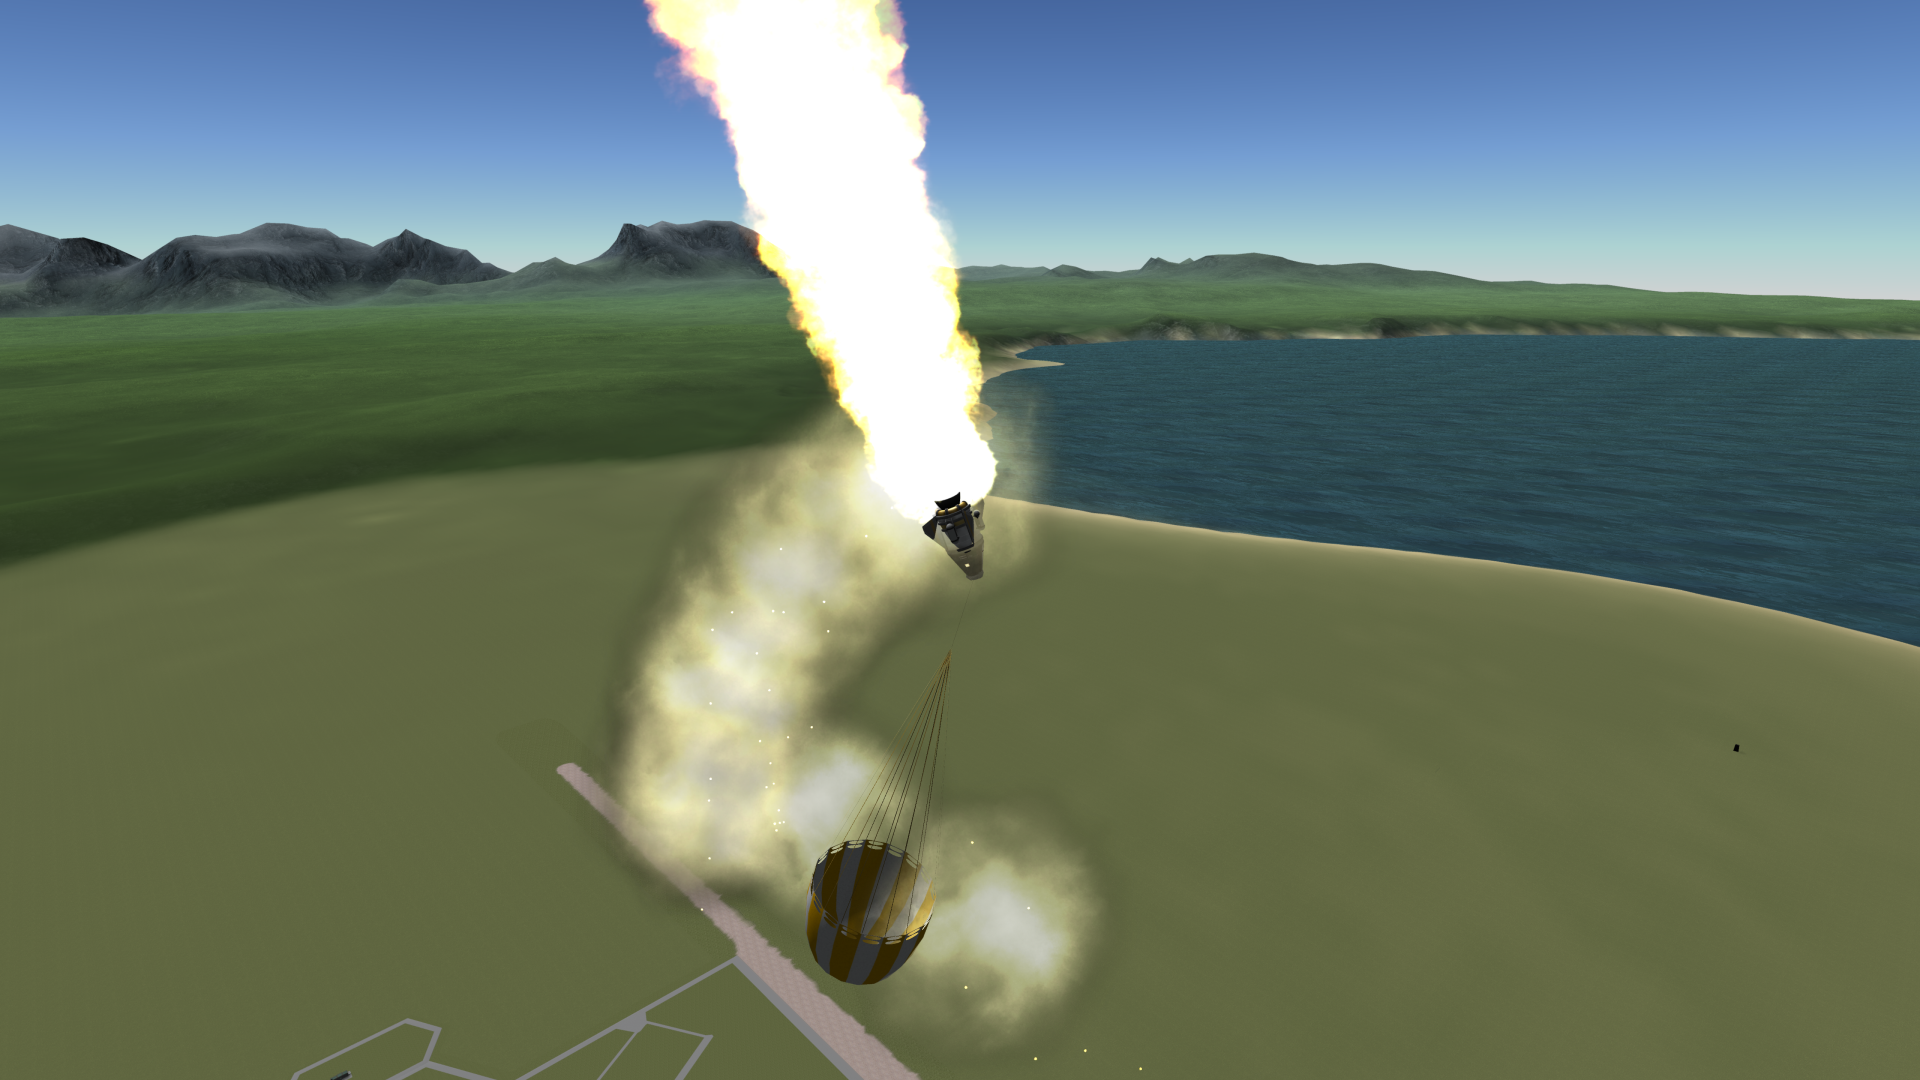 The Mark One tumbles after launch.